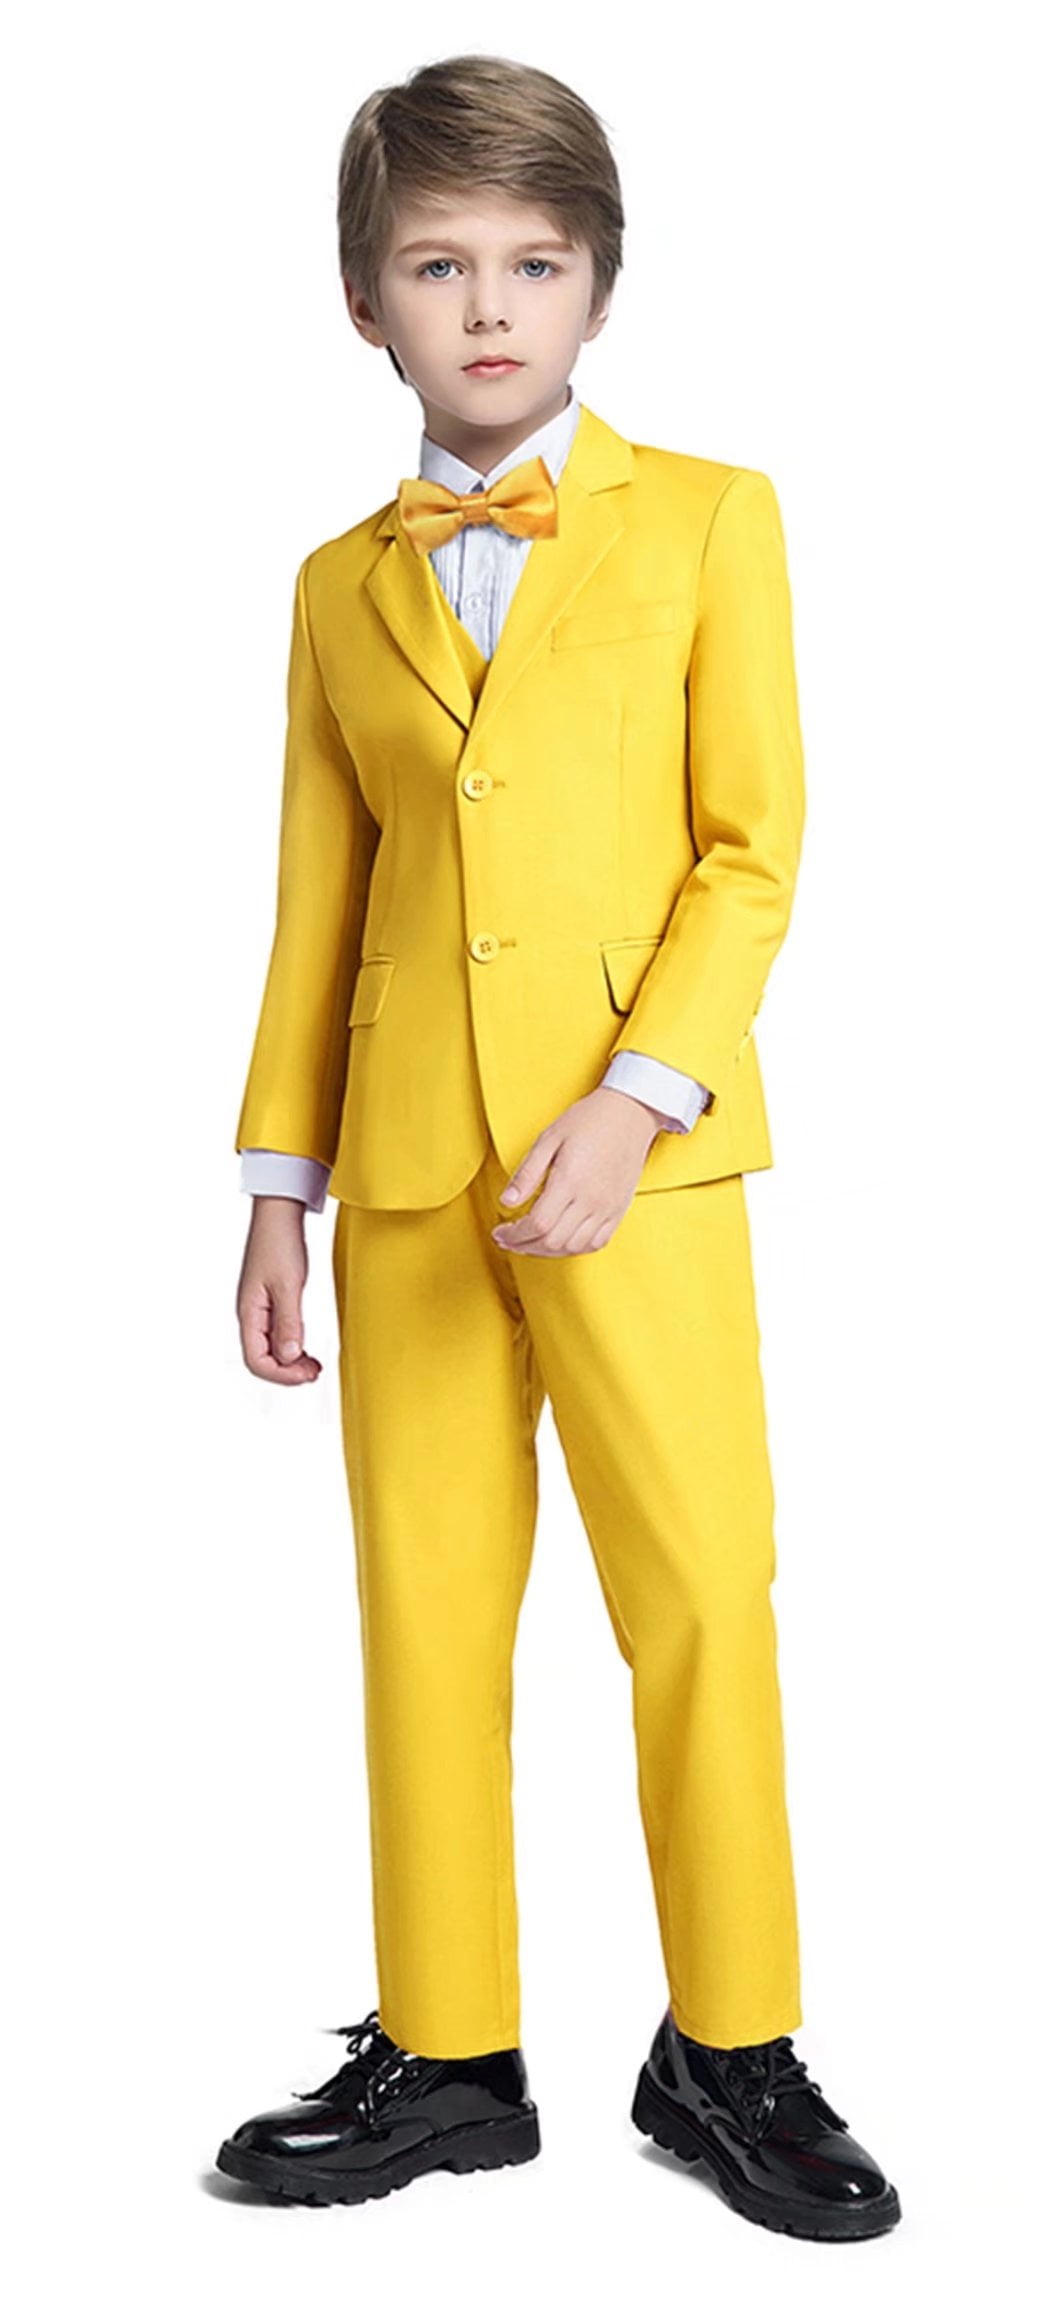 Toddler Suits Boys Tuxedo Suits Wedding Outfit Ring Bearer Suits Easter Suit 5Piece Boys Set for Boys Size Yellow 12 - Walmart.com